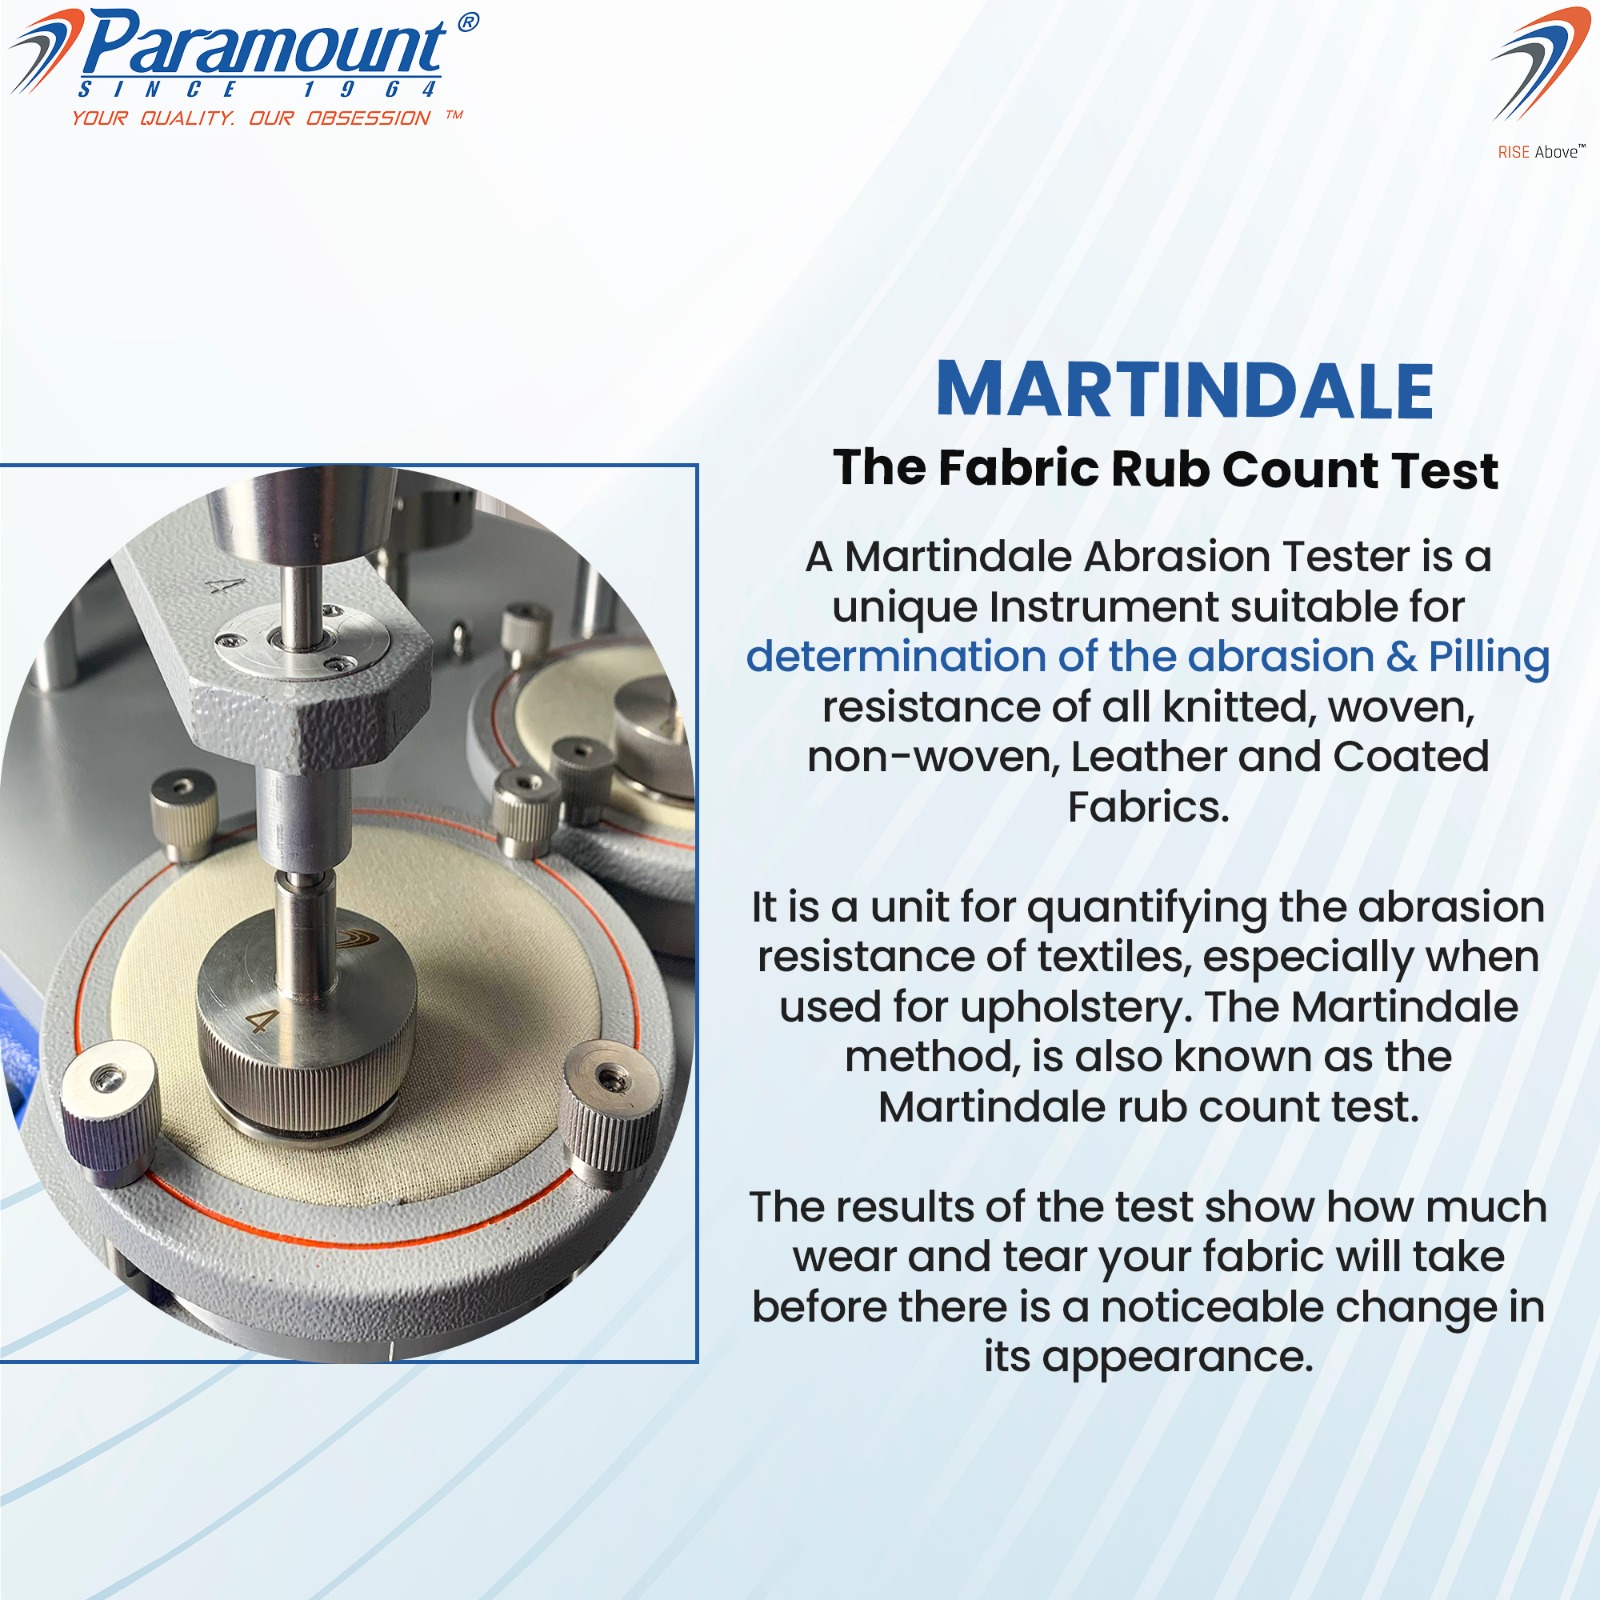 7 Paramount 7

IN CF

YOUR QUALITY. OUR OBSESSION ™

MARTINDALE

The Fabric Rub Count Test

A Martindale Abrasion Tester is a
unique Instrument suitable for
determination of the abrasion & Pilling
resistance of all knitted, woven,
non-woven, Leather and Coated
Fabrics.

It is a unit for quantifying the abrasion
resistance of textiles, especially when
used for upholstery. The Martindale
method, is also known as the
Martindale rub count test.

The results of the test show how much
wear and tear your fabric will take
before there is a noticeable change in
its appearance.